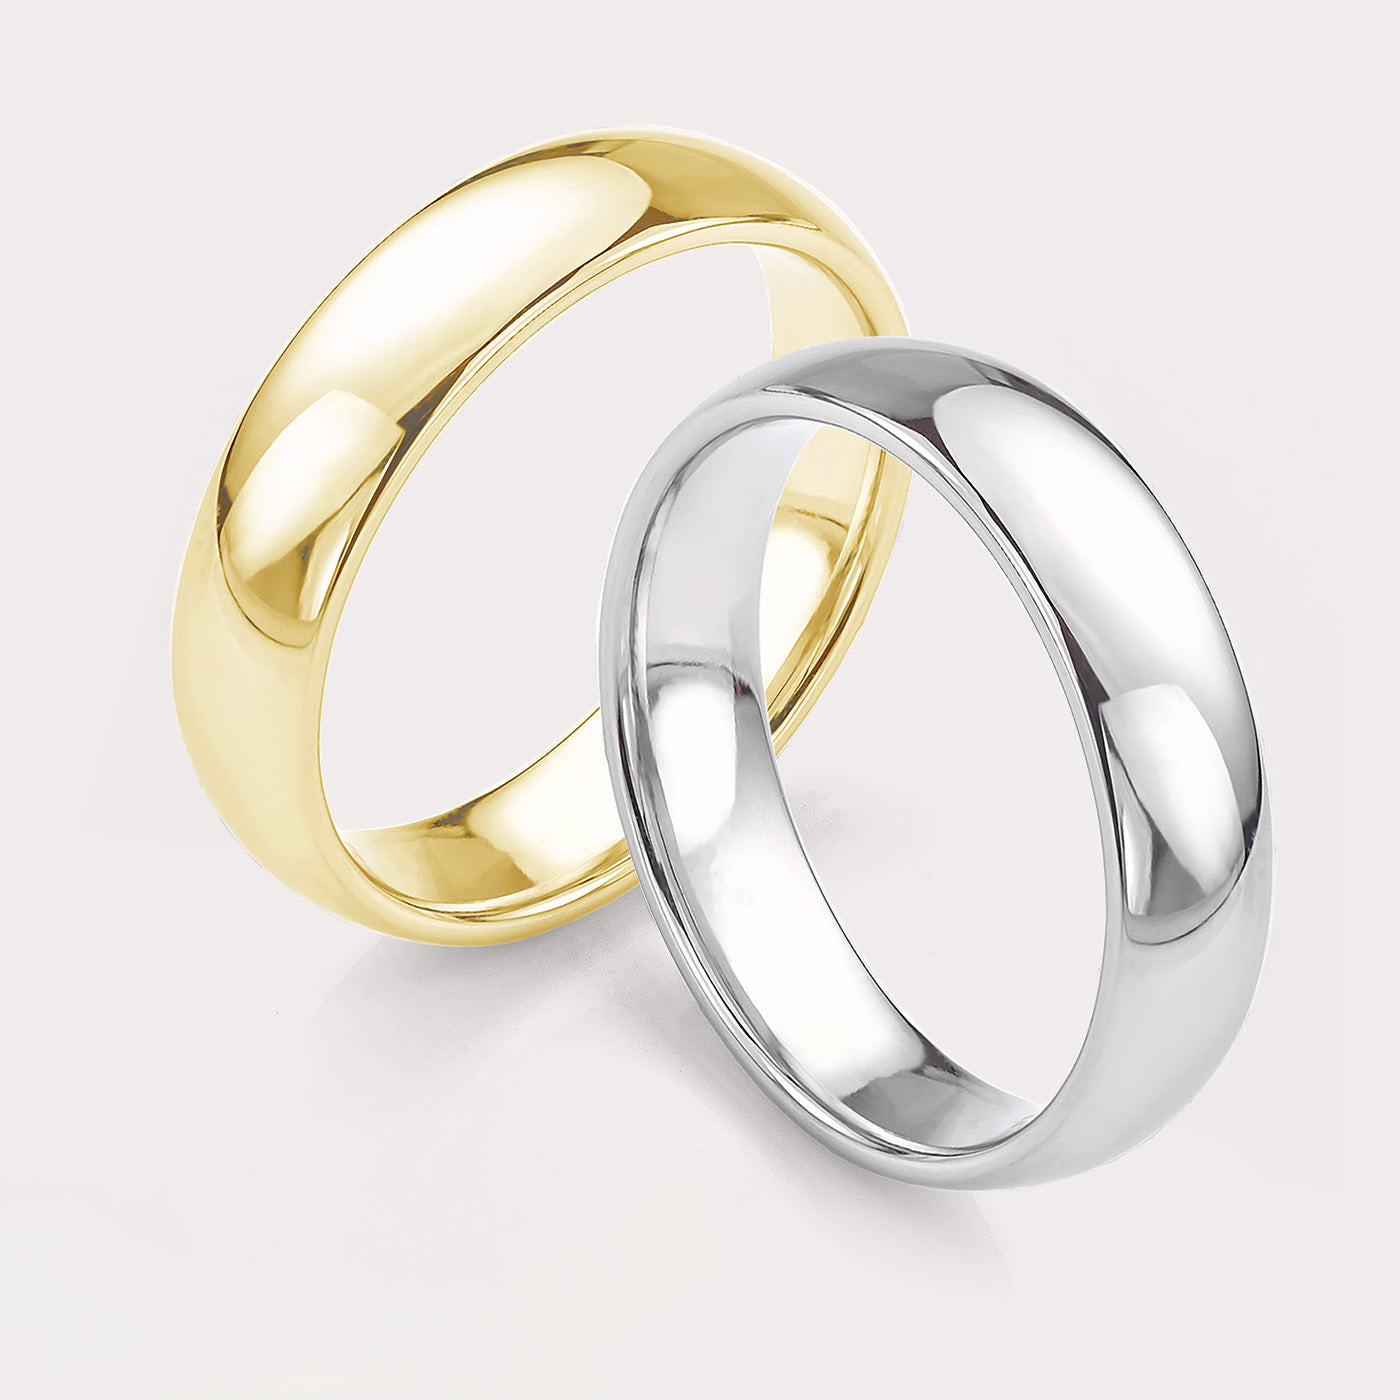 Wedding Bands in Yellow and White Metal.